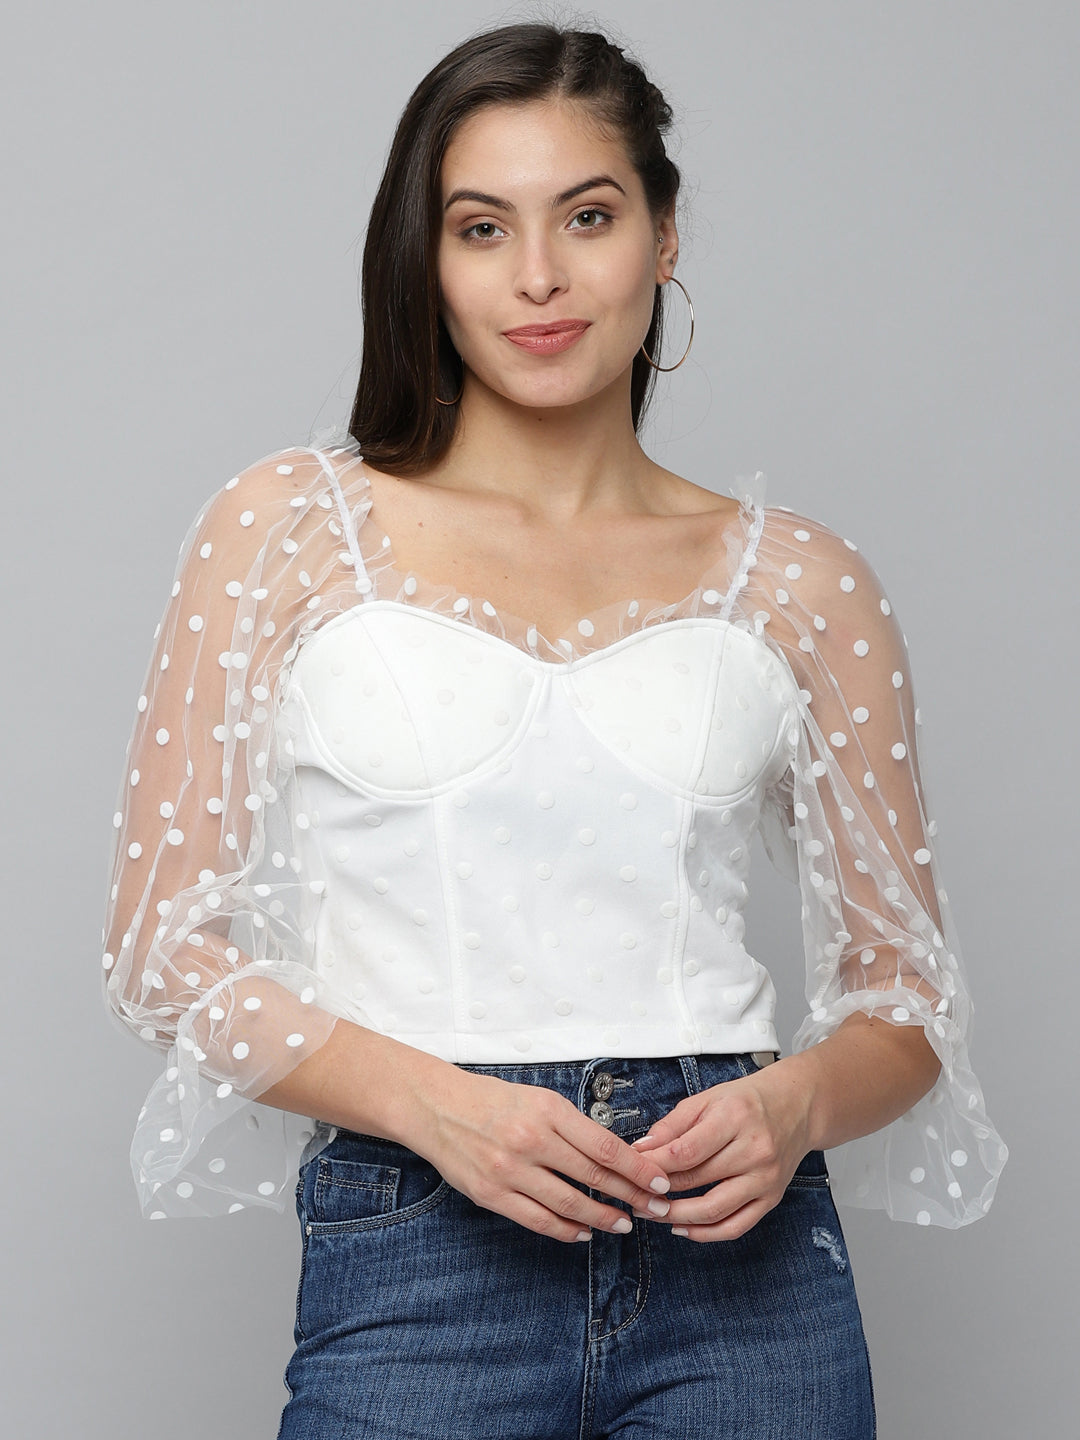 Women Sweetheart Neck Solid White Fitted Top